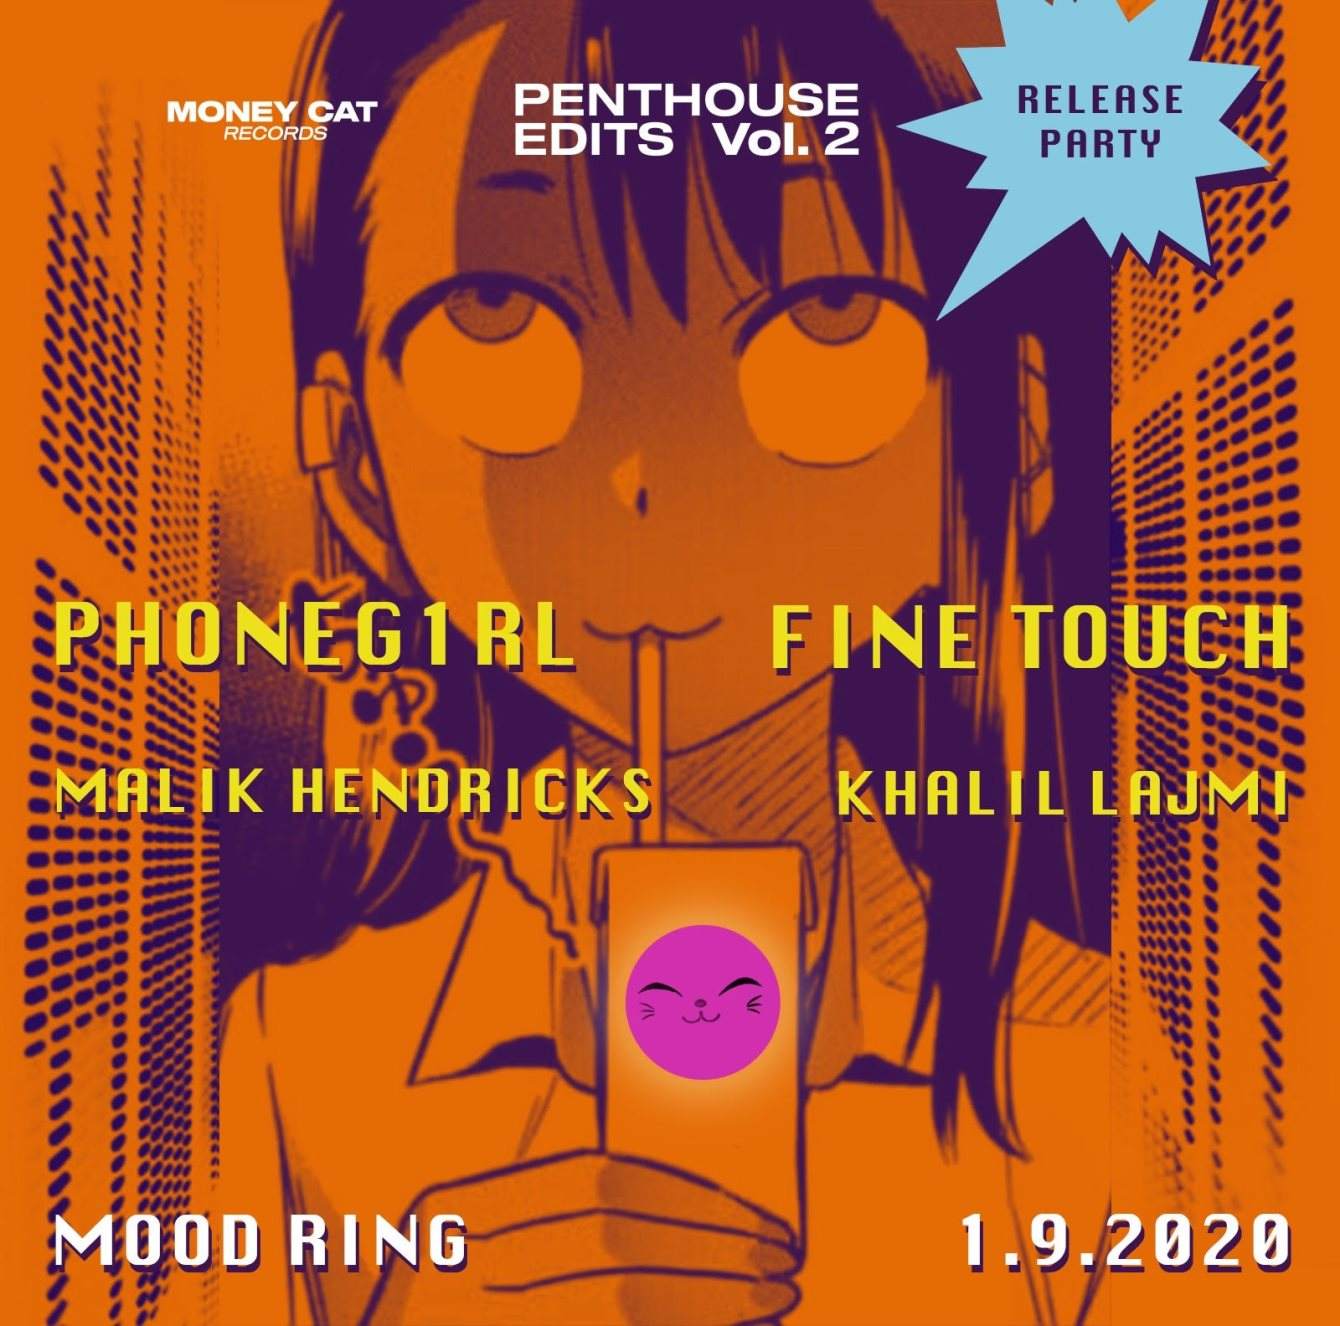 Penthouse Edits Vol. 2 Release Party - フライヤー表